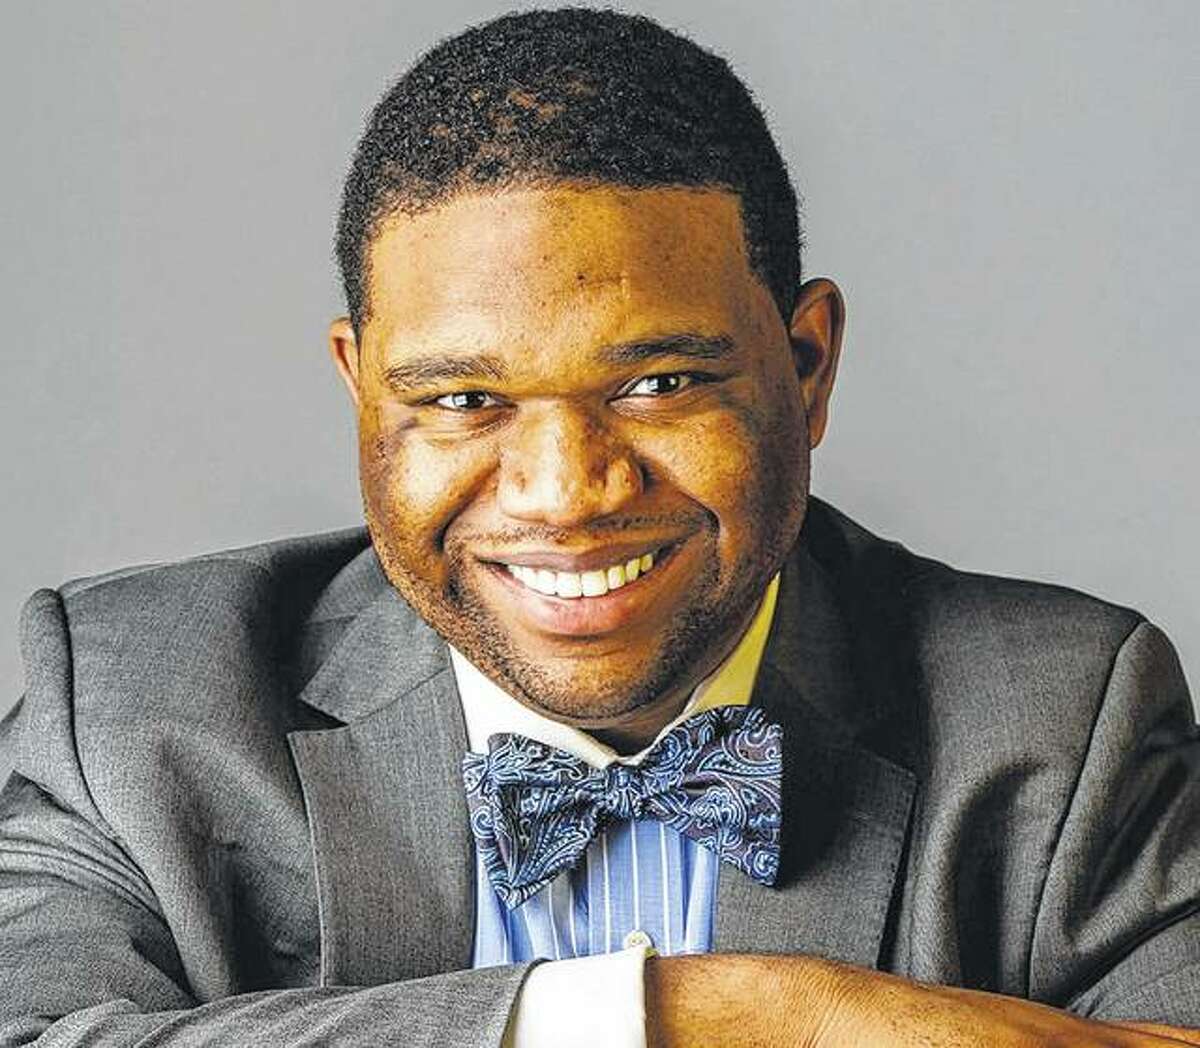 Lyric tenor J. Warren Mitchell is establishing himself in the international opera world after years as a choral music educator and conductor. He will perform Saturday with the Jacksonville Symphony Orchestra.